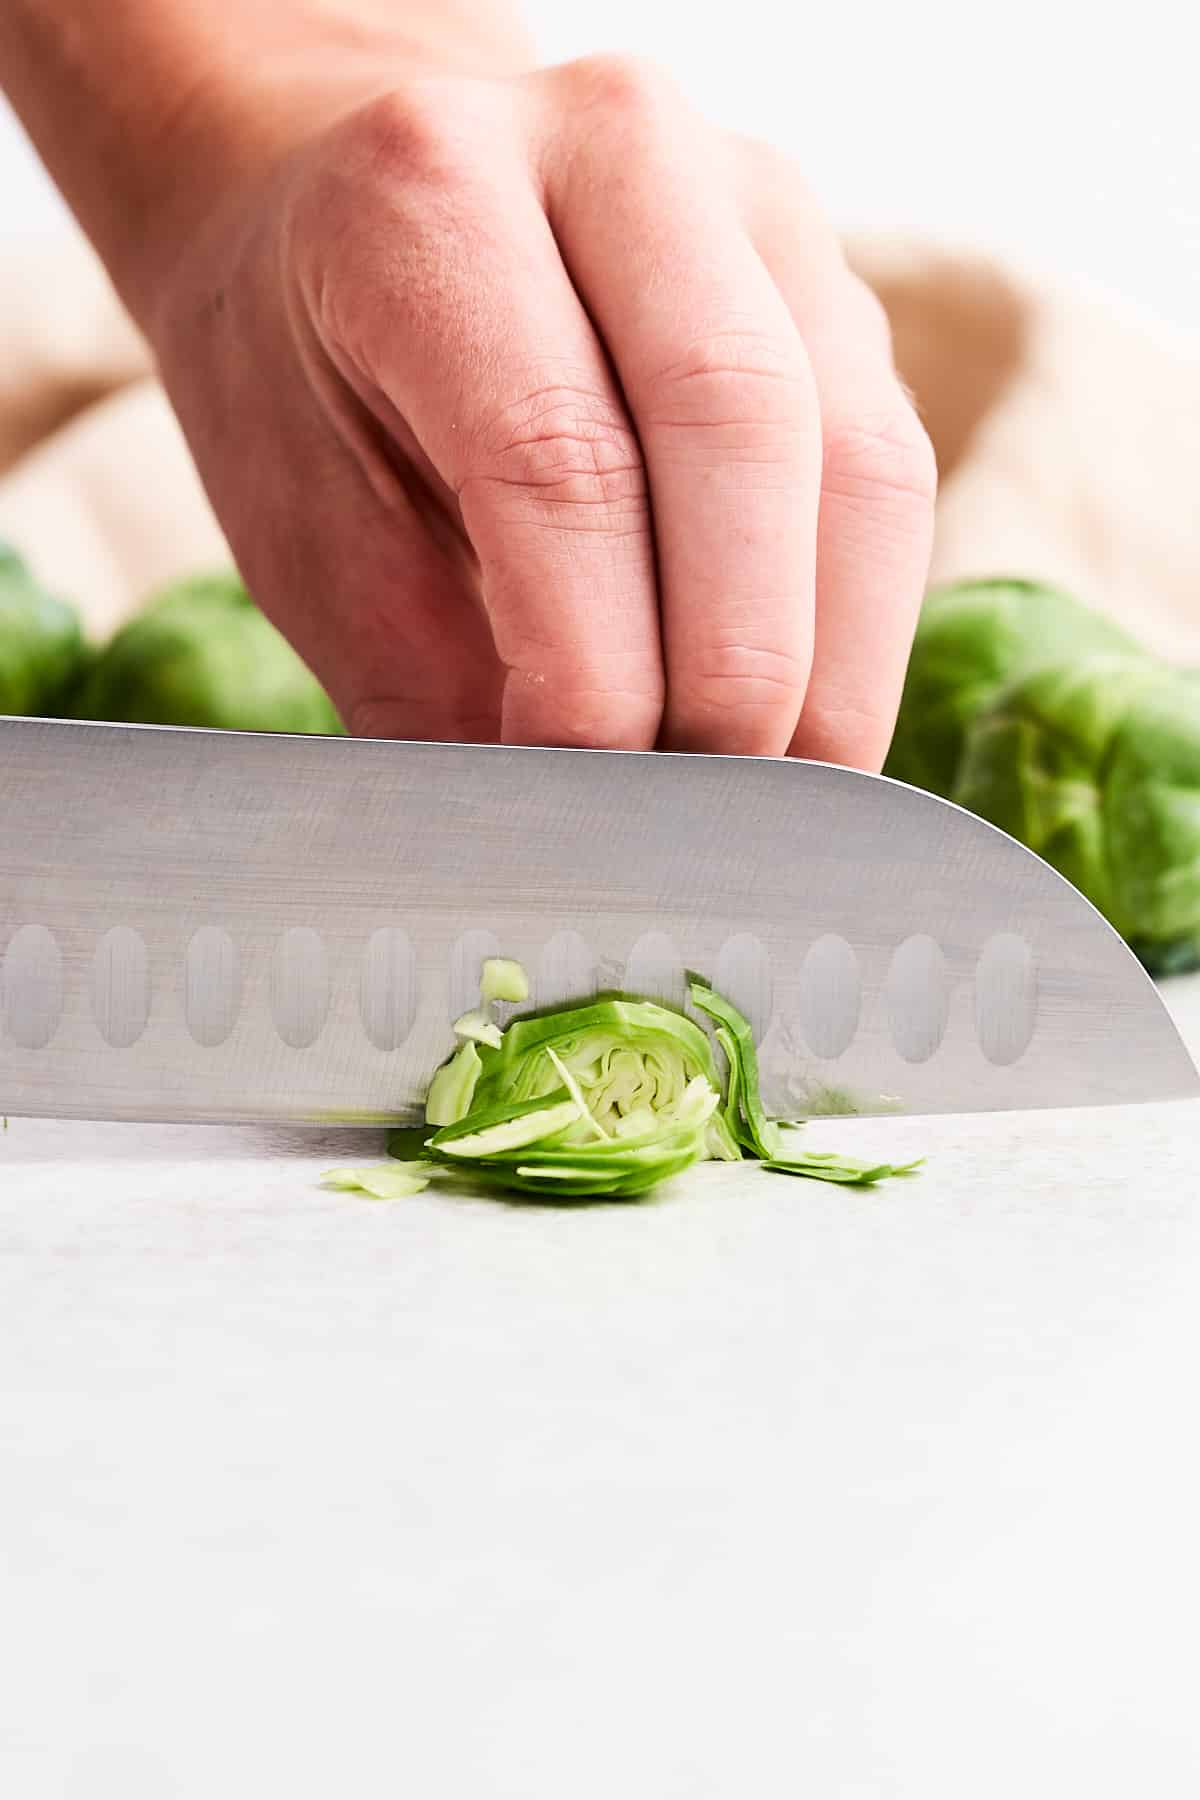 Shredding a Brussels sprout.